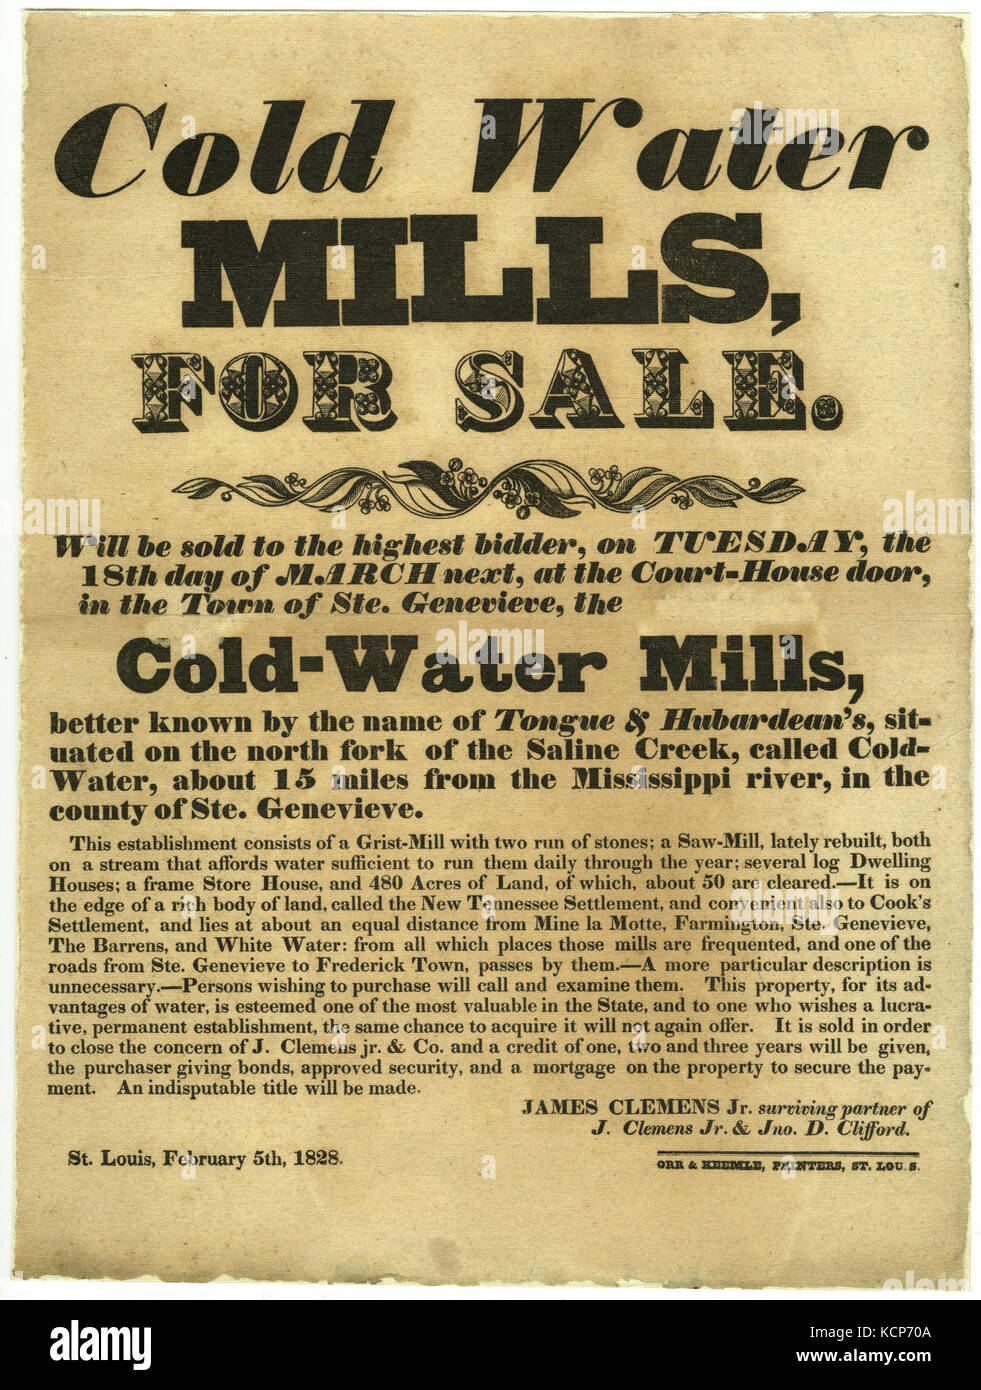 Broadside  Cold Water Mills for Sale, Ste. Genevieve, February 5, 1828 Stock Photo